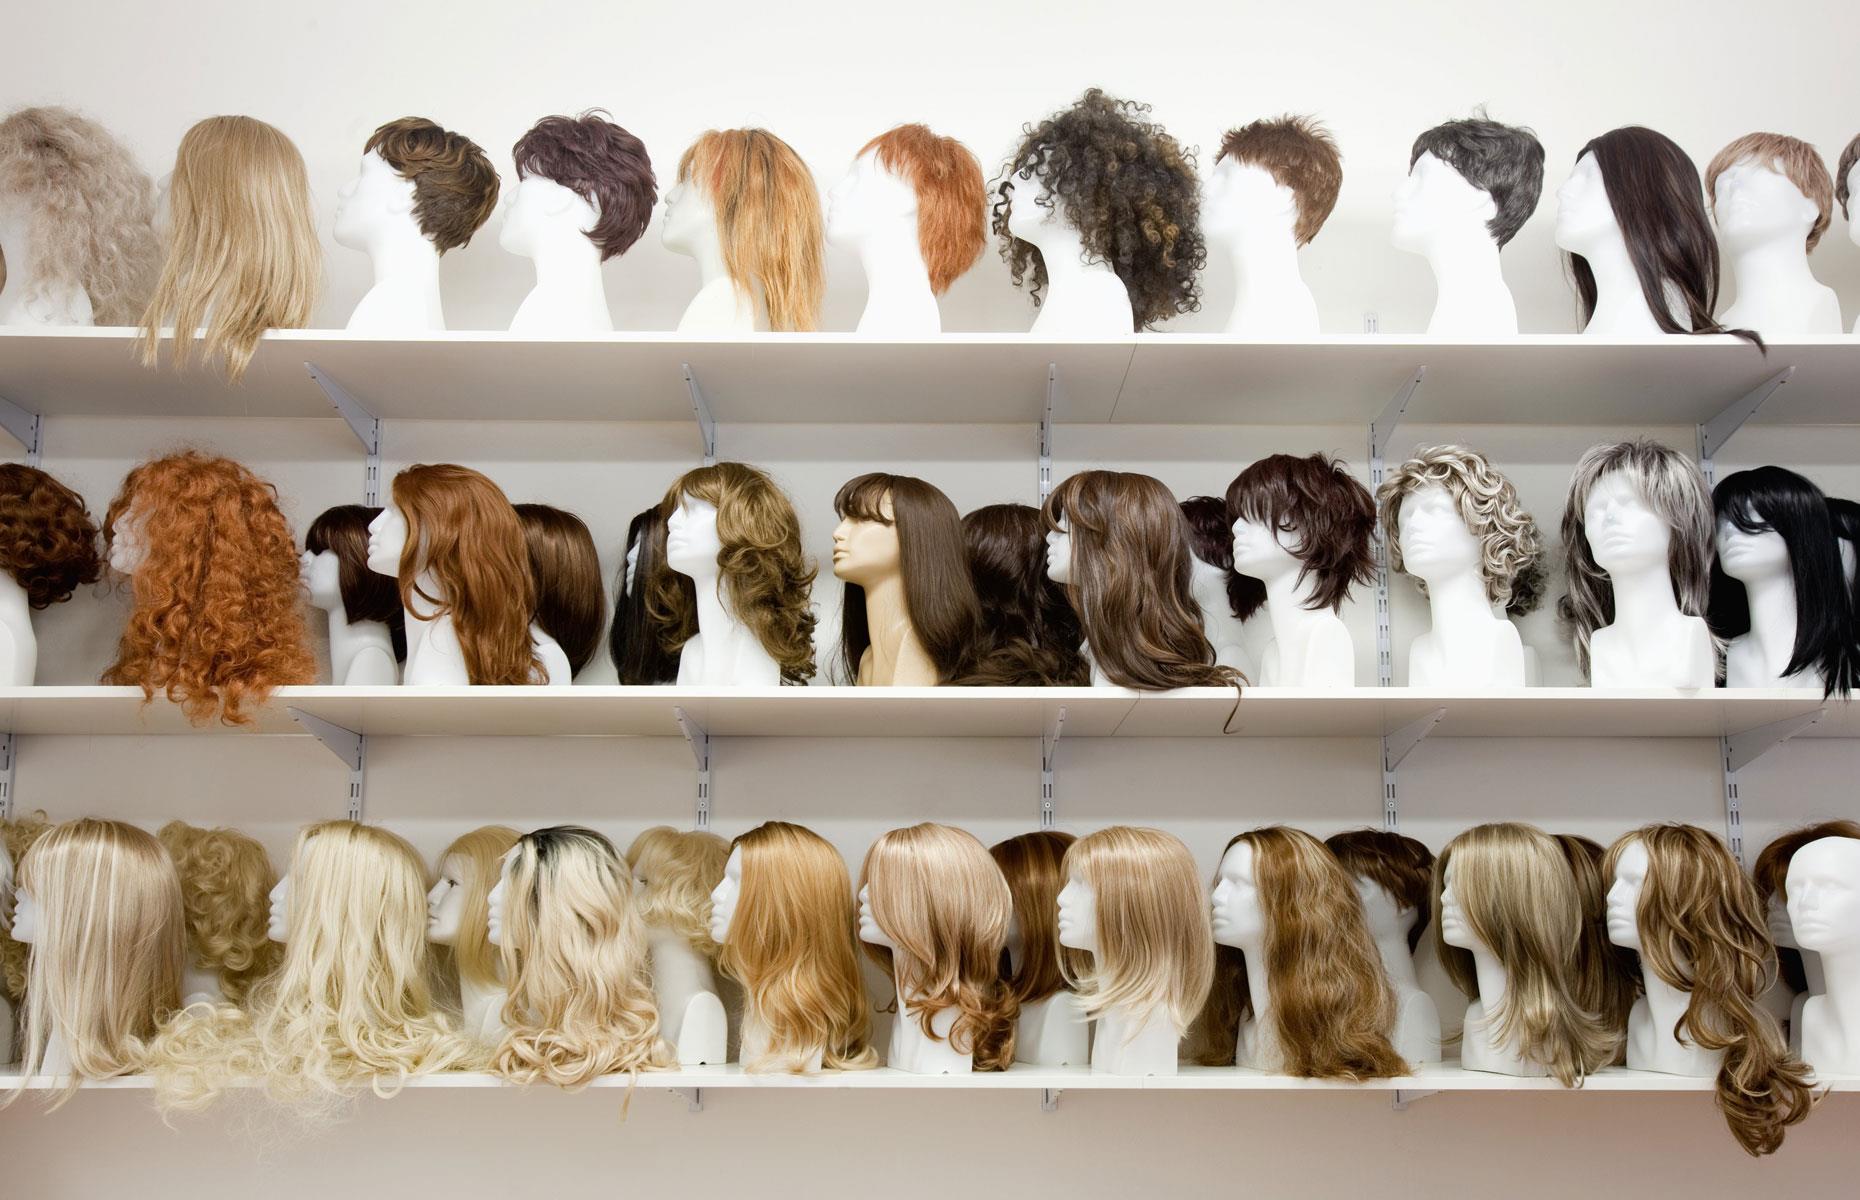 The wigs worth up to $80,000 (£62.1k)